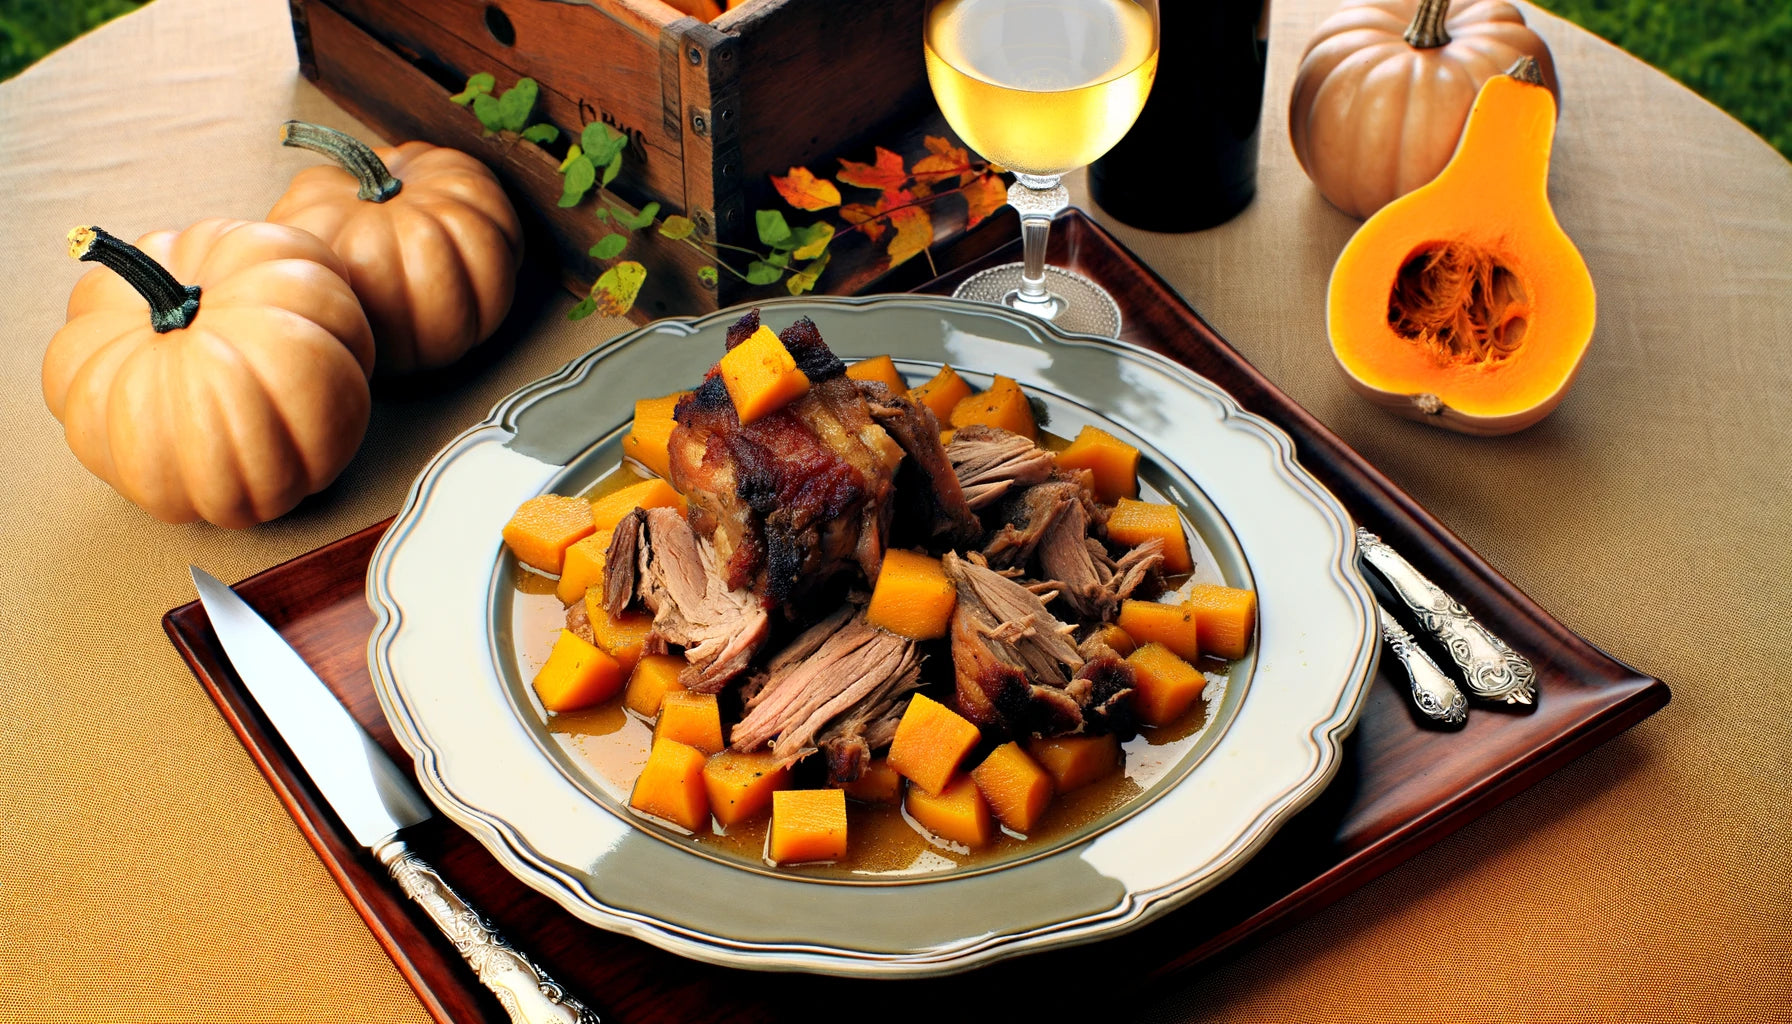 Cider-Braised Pork Shoulder with Butternut Squash on the Grill Recipe